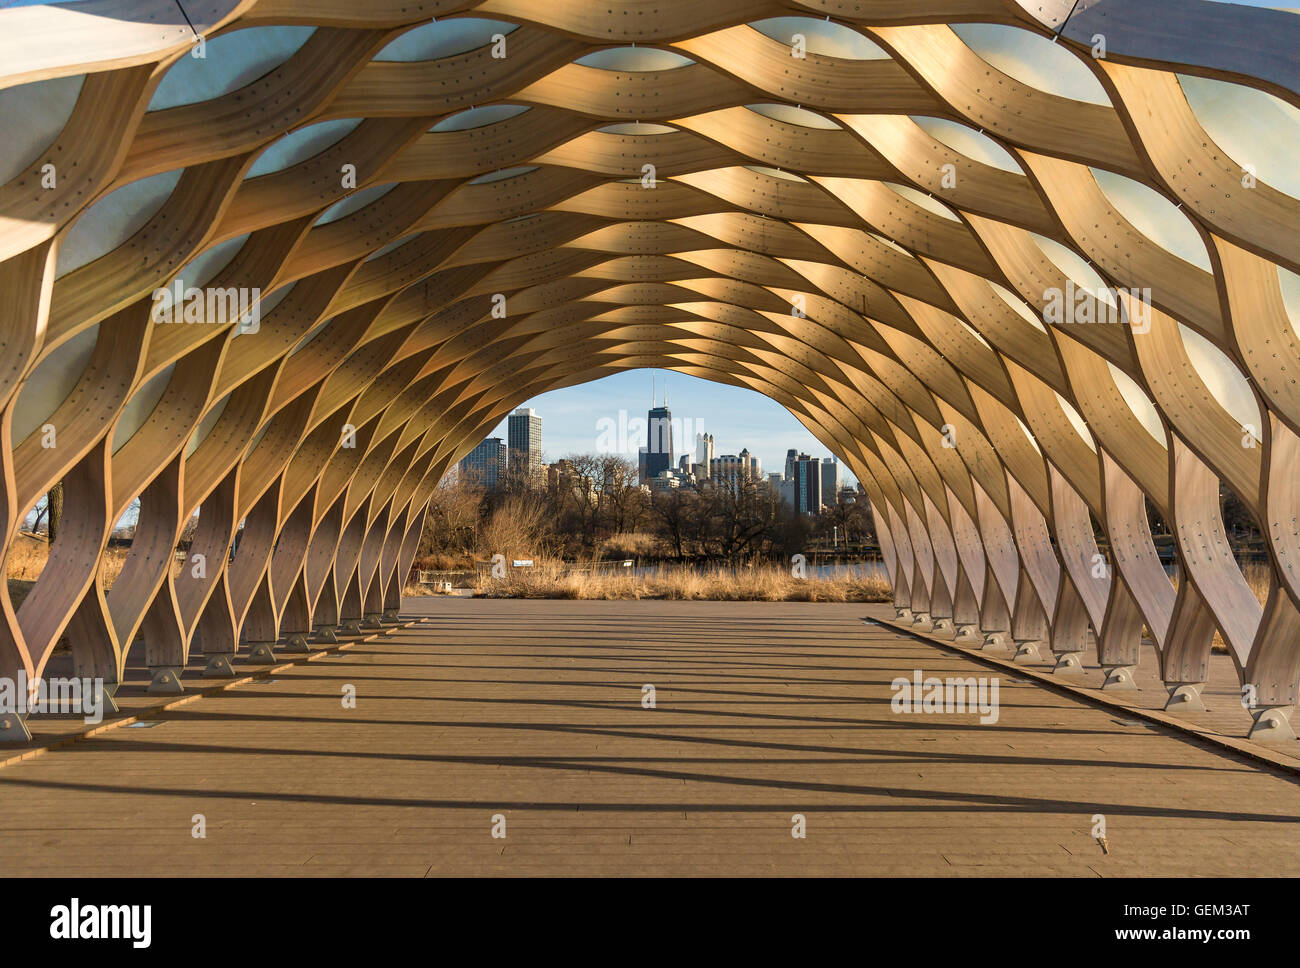 Chicago, USA - May 2015. Studio Gang’s Curvaceous Wood Pavilion at Chicago’s Lincoln Park Zoo Stock Photo